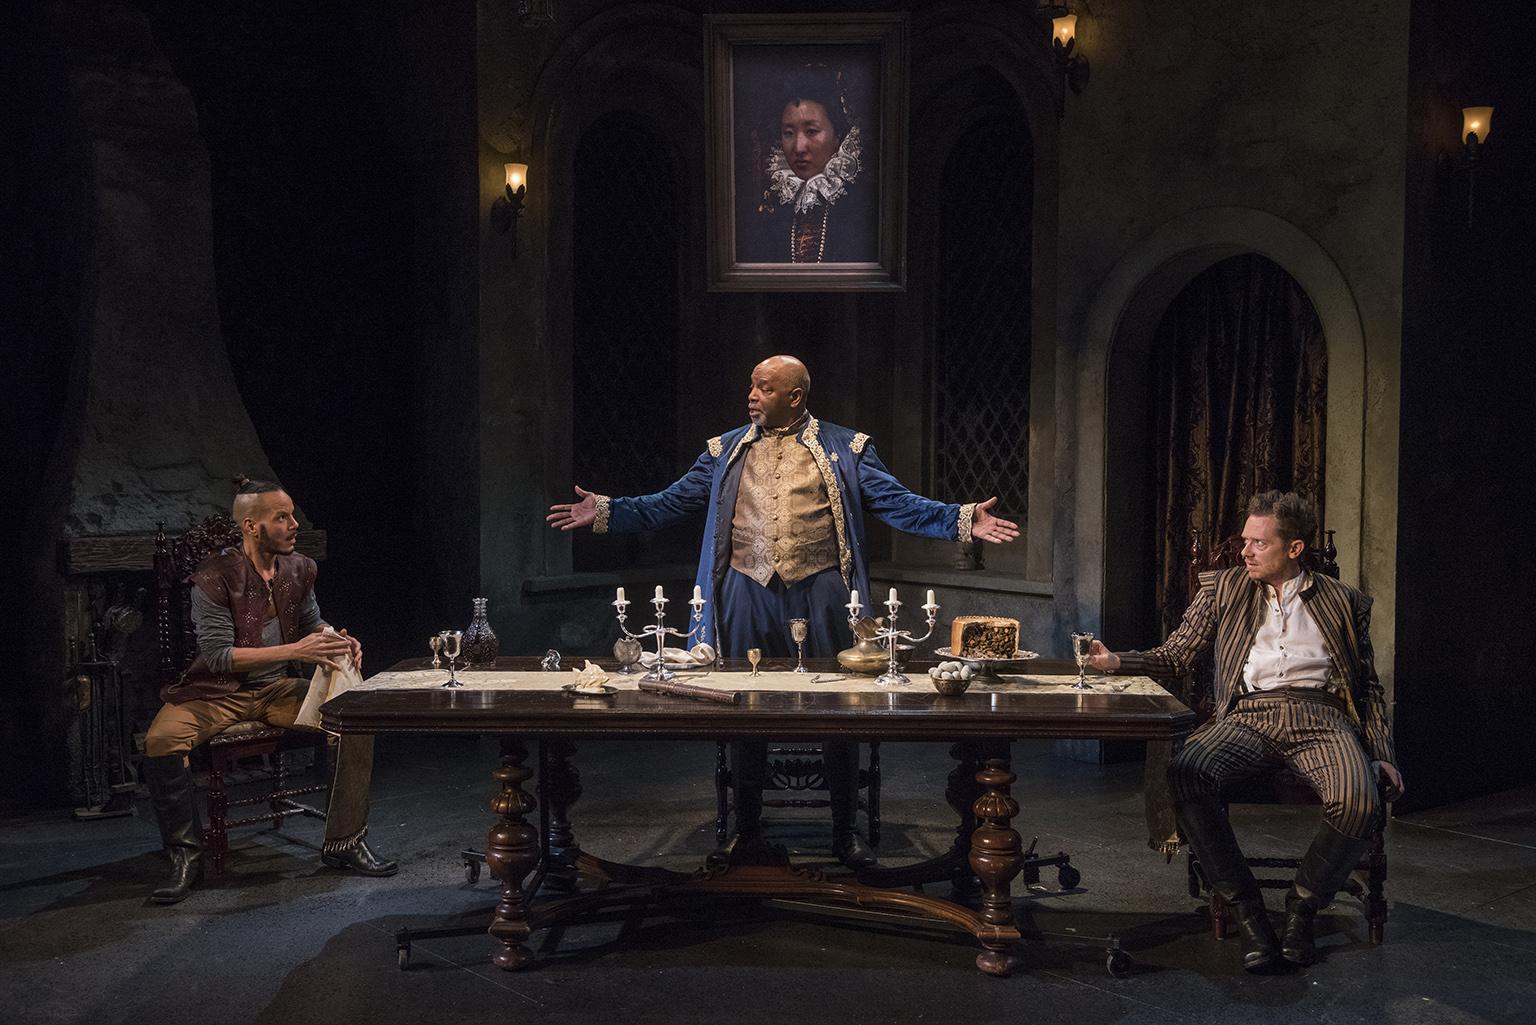 From left: Jon Hudson Odom, David Alan Anderson and Steve Haggard in “Witch.” (Photo credit: Michael Brosilow)